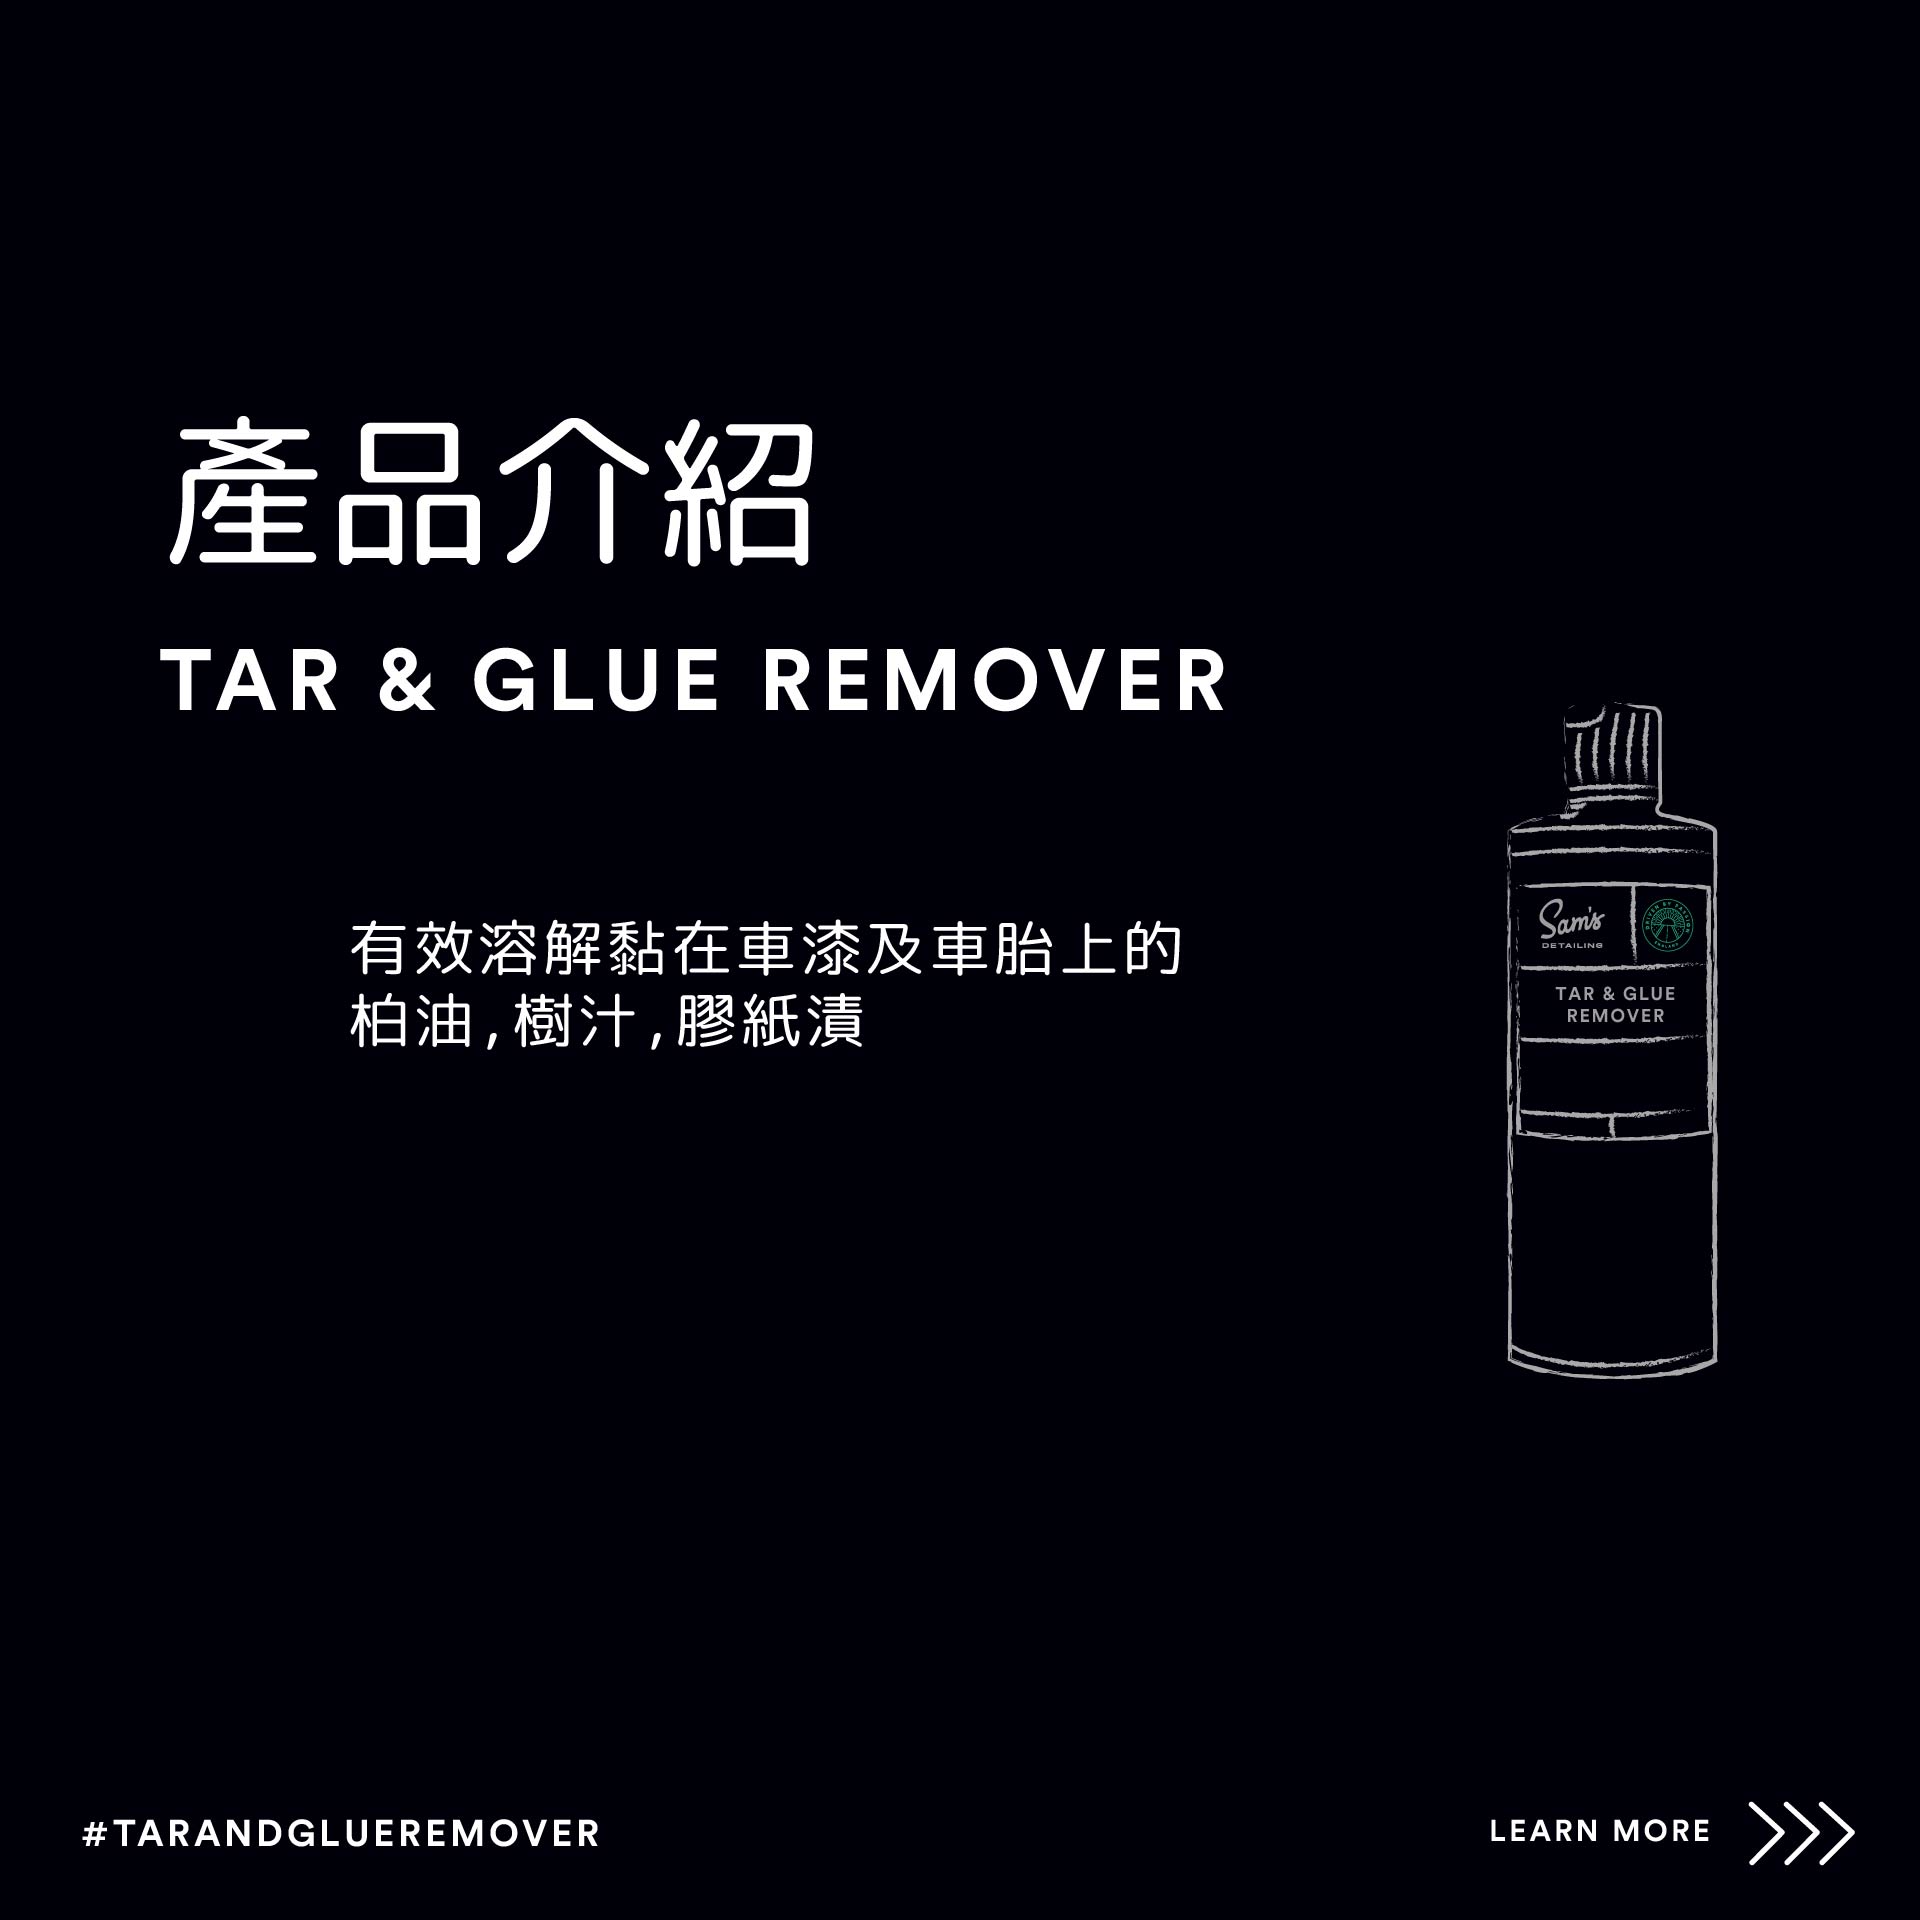 Tar%20and%20Glue%20Remover-02.jpg